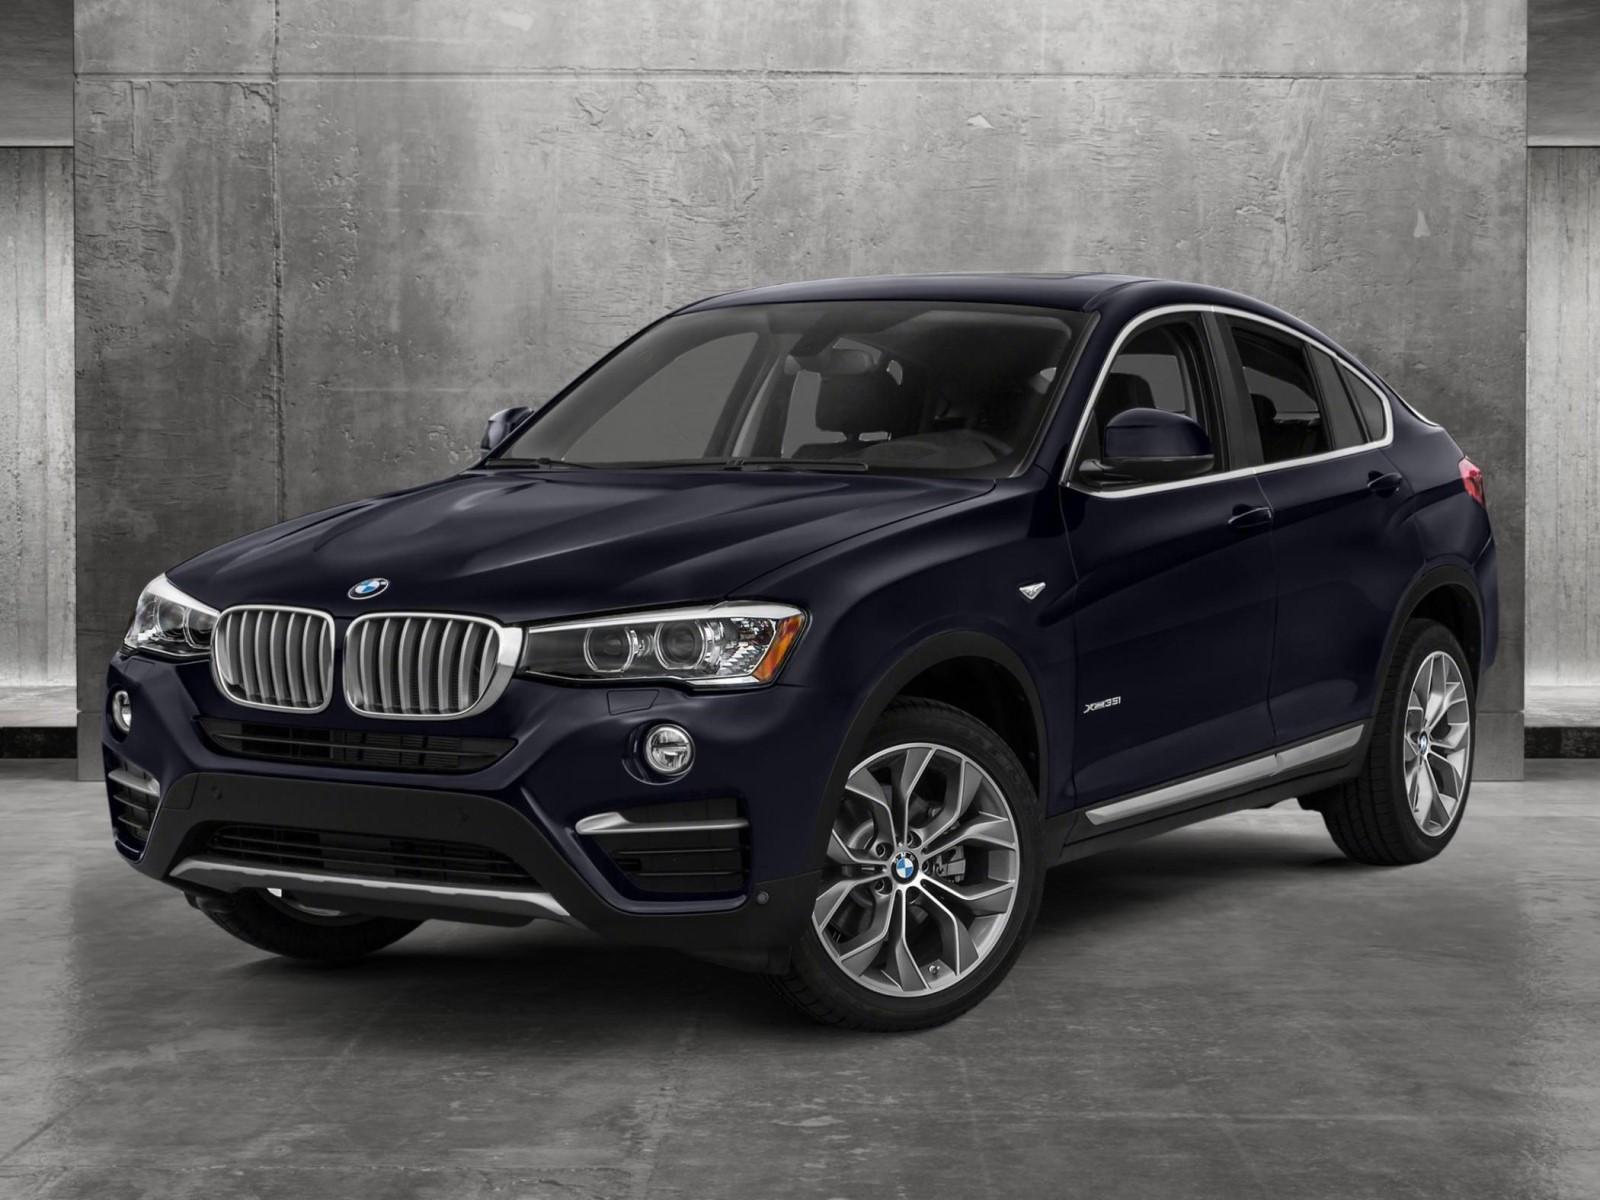 2016 BMW X4 xDrive35i Vehicle Photo in Rockville, MD 20852